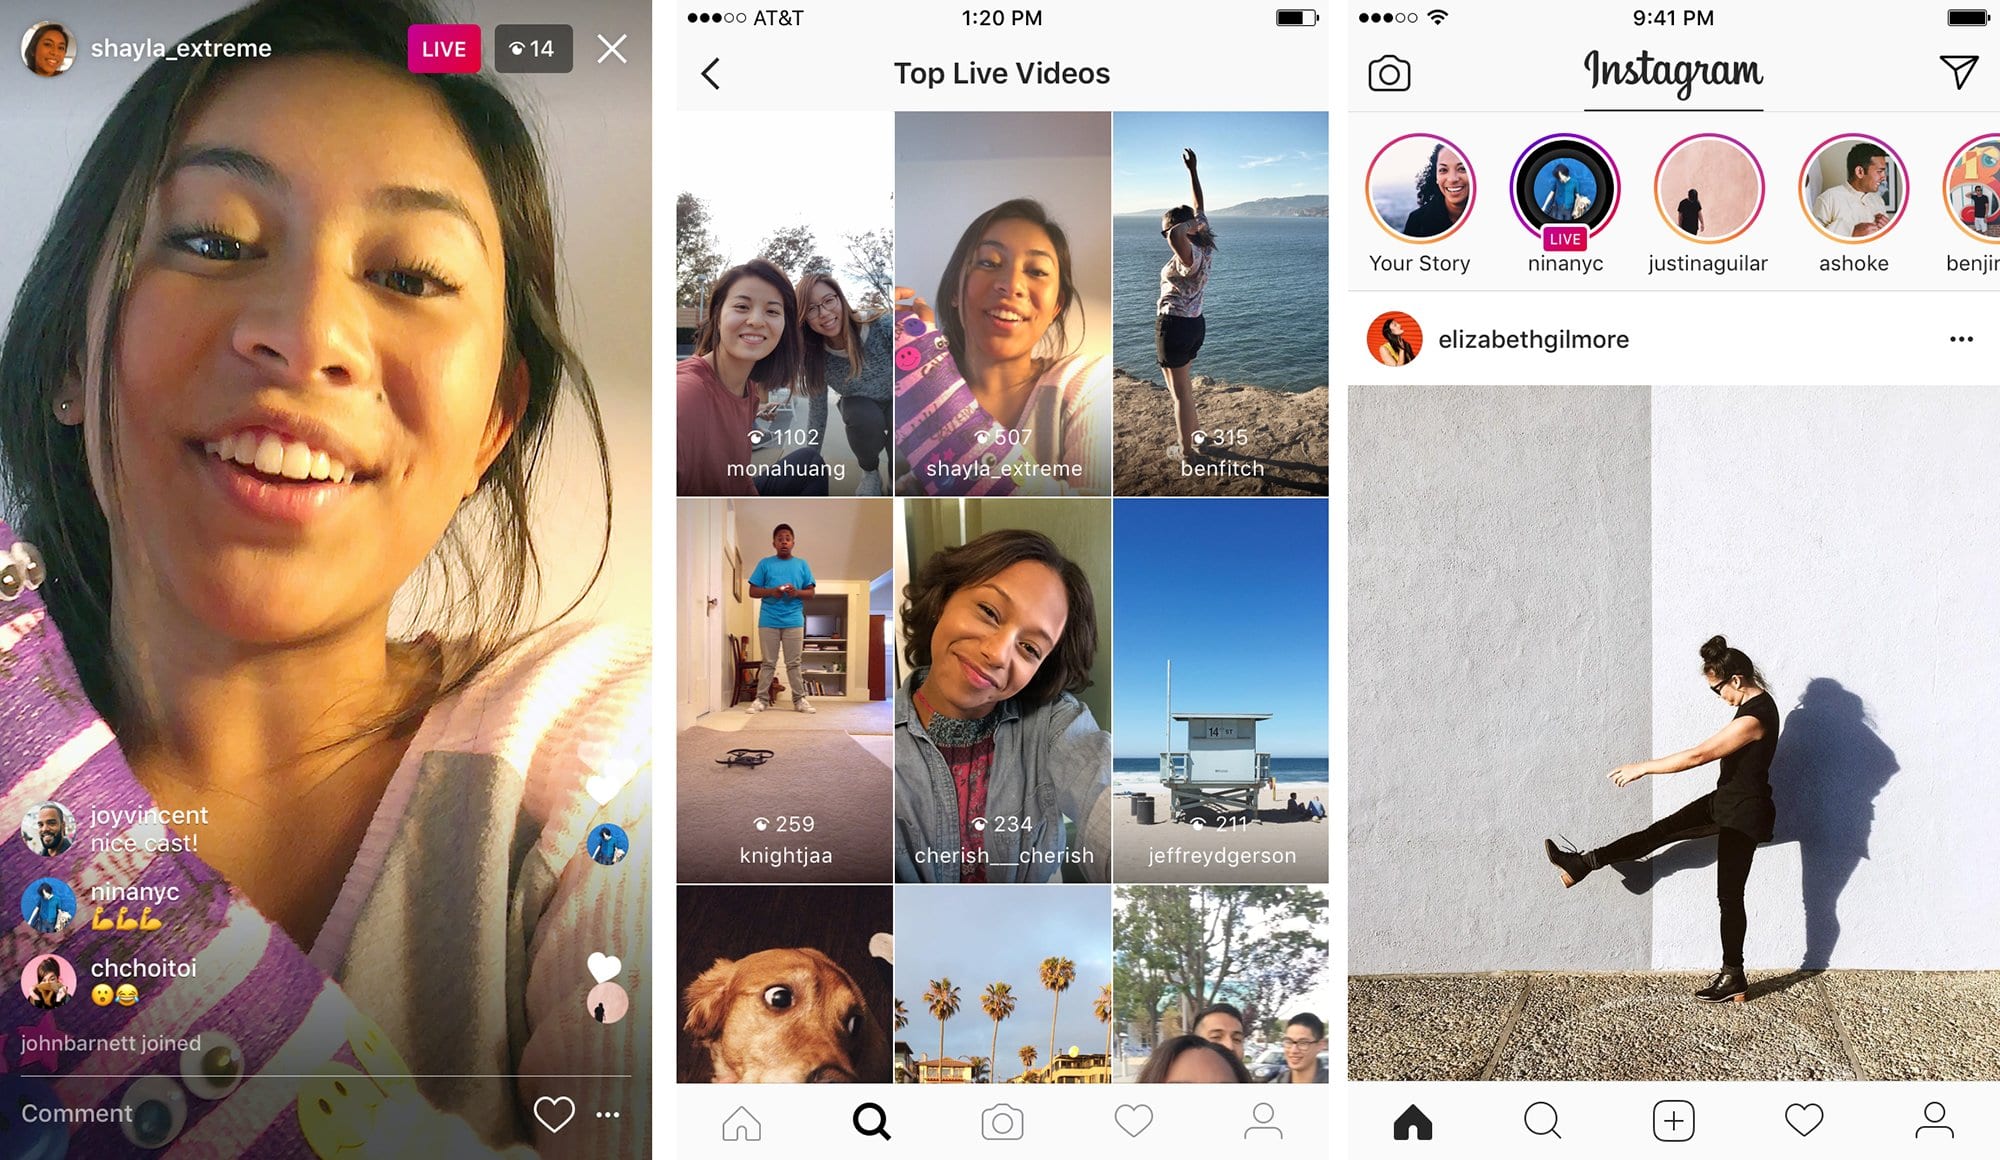 Instagram live interface profile avatar and feed